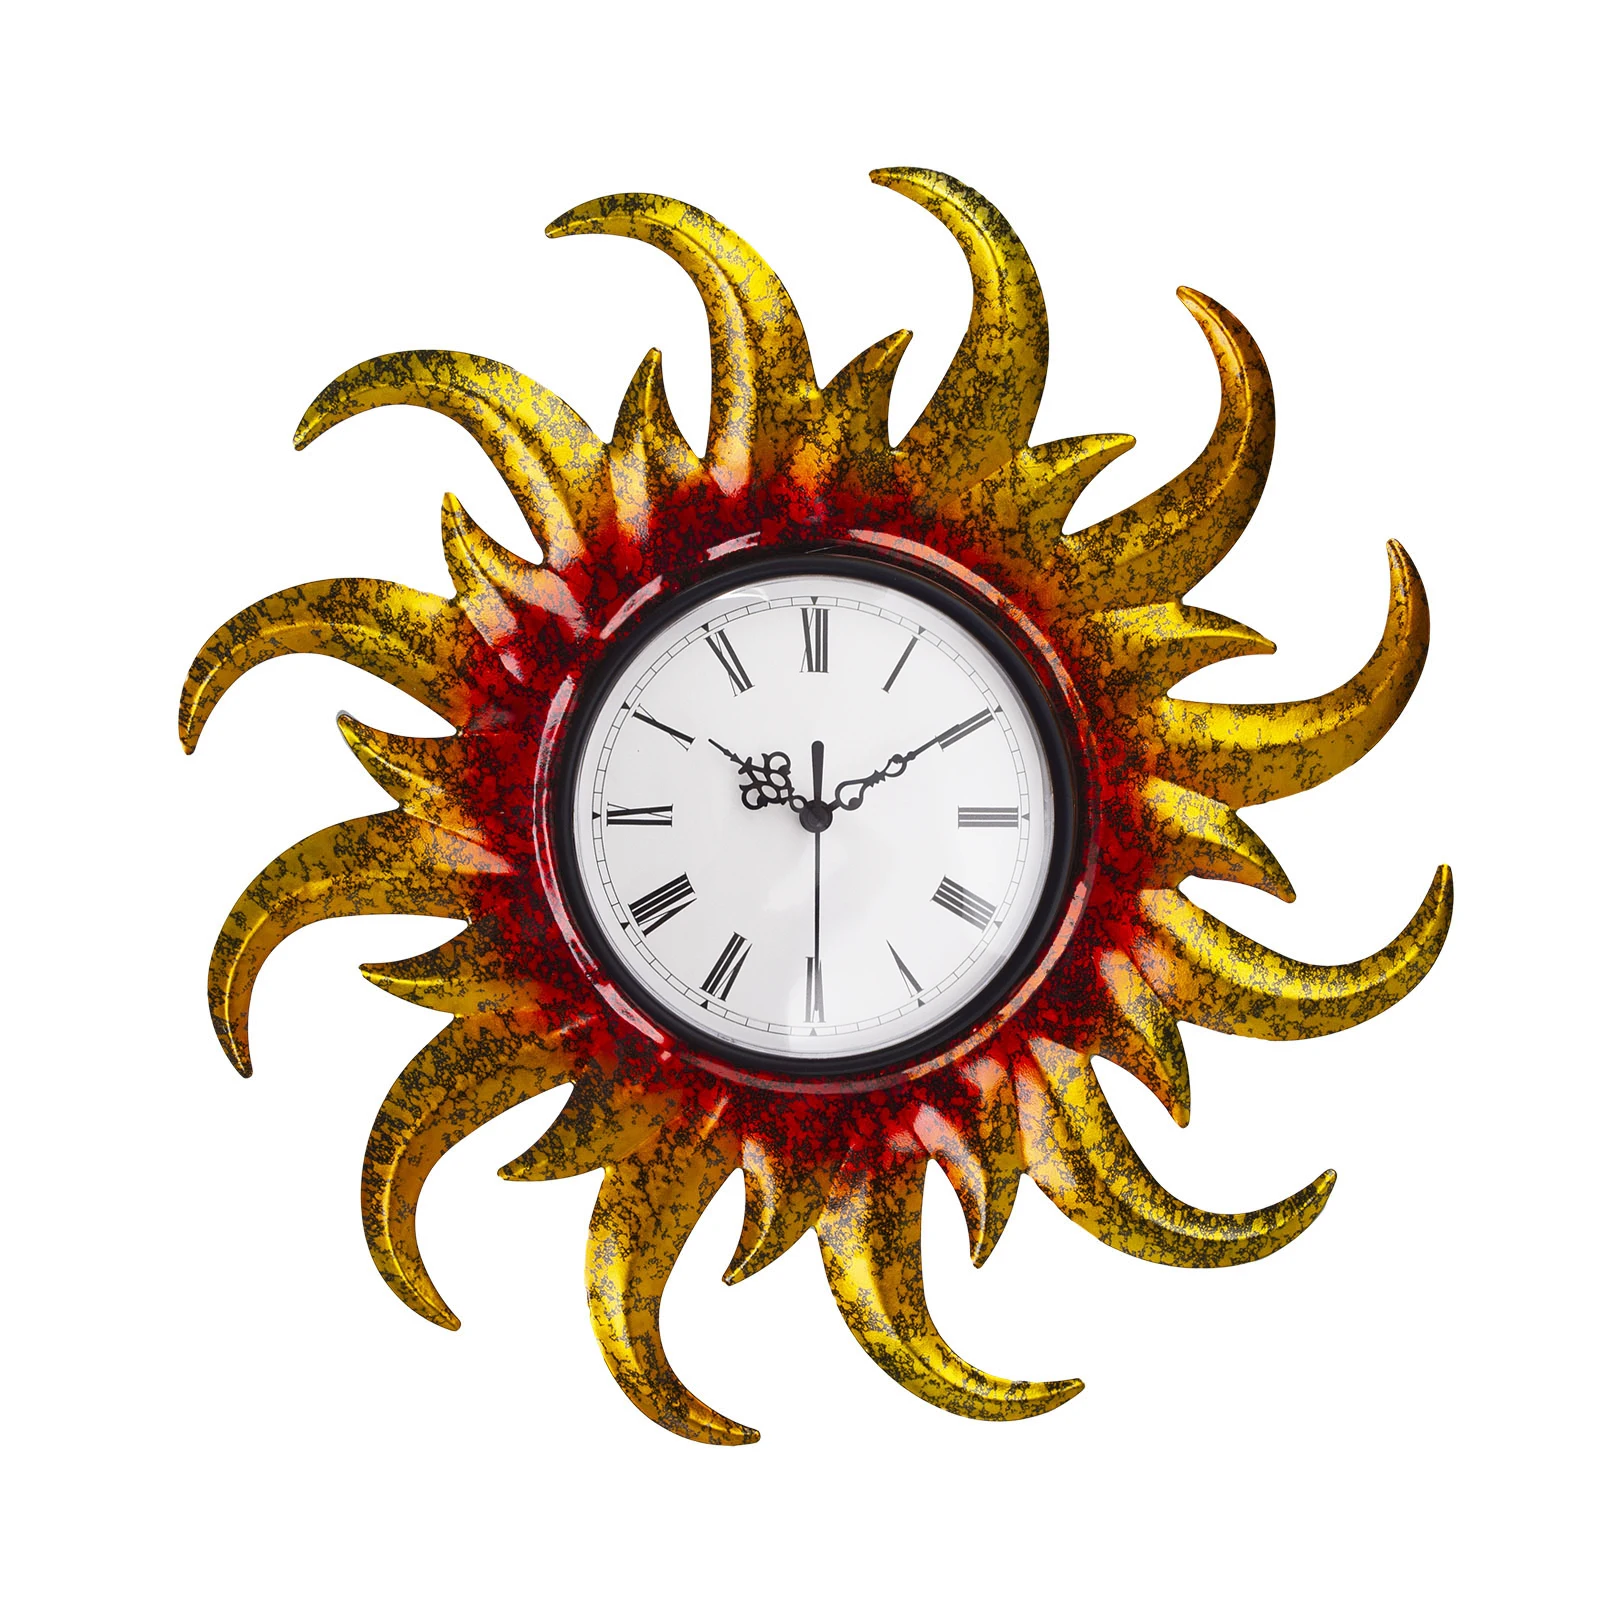 Indoor Outdoor Clocks, Silent Non-Ticking Sunflower Wall Clock for Patio, Home Decorations